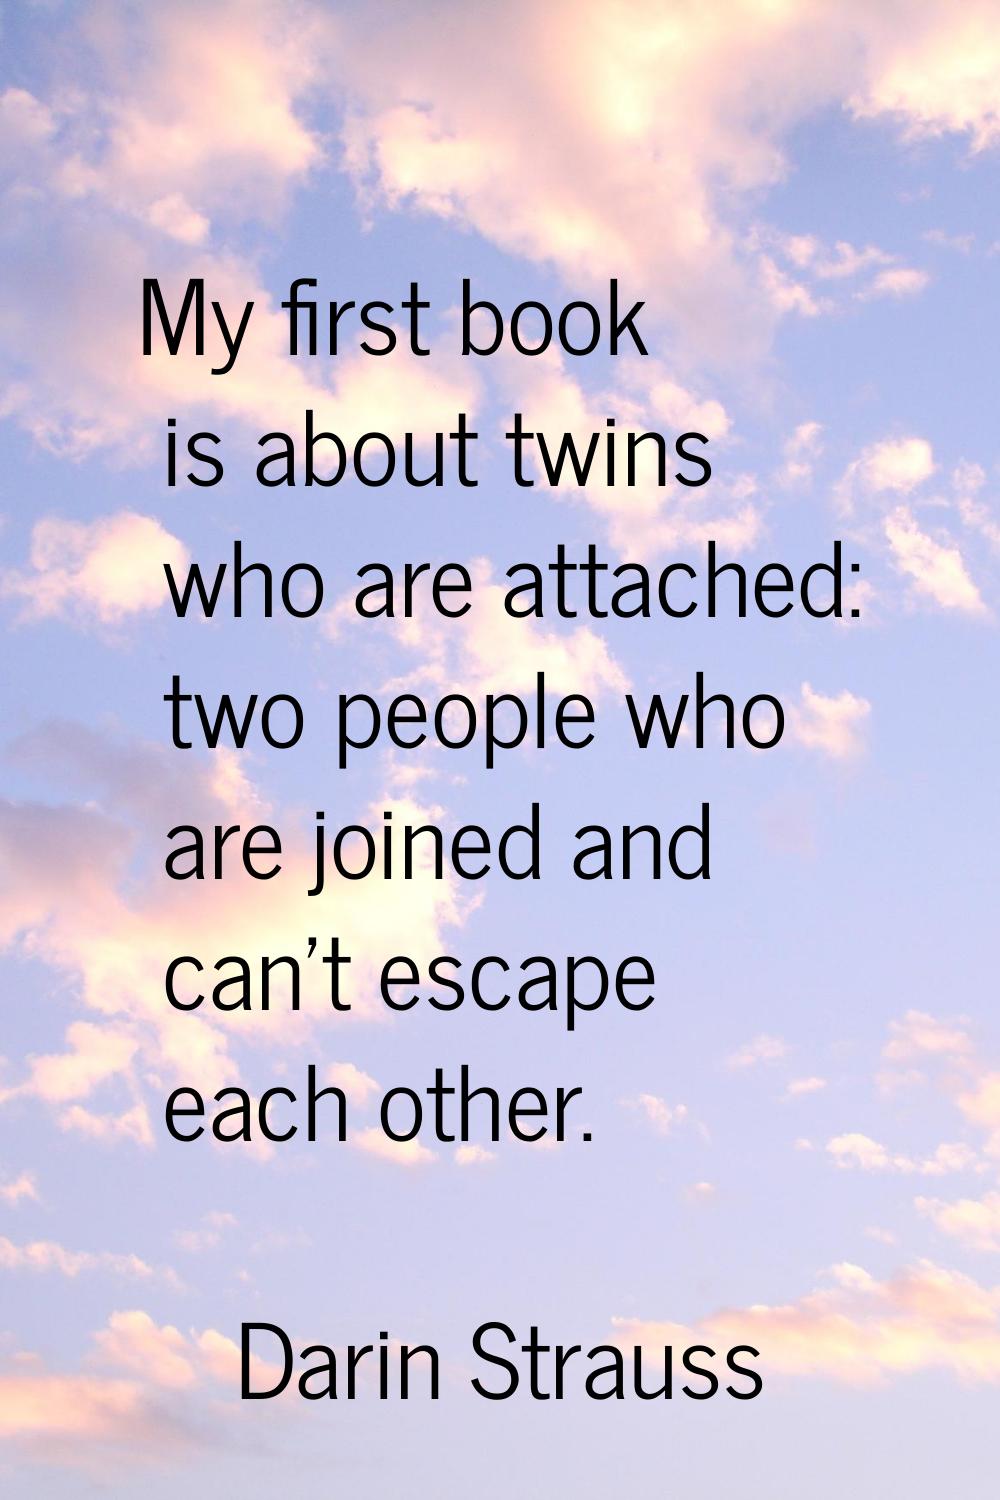 My first book is about twins who are attached: two people who are joined and can't escape each othe